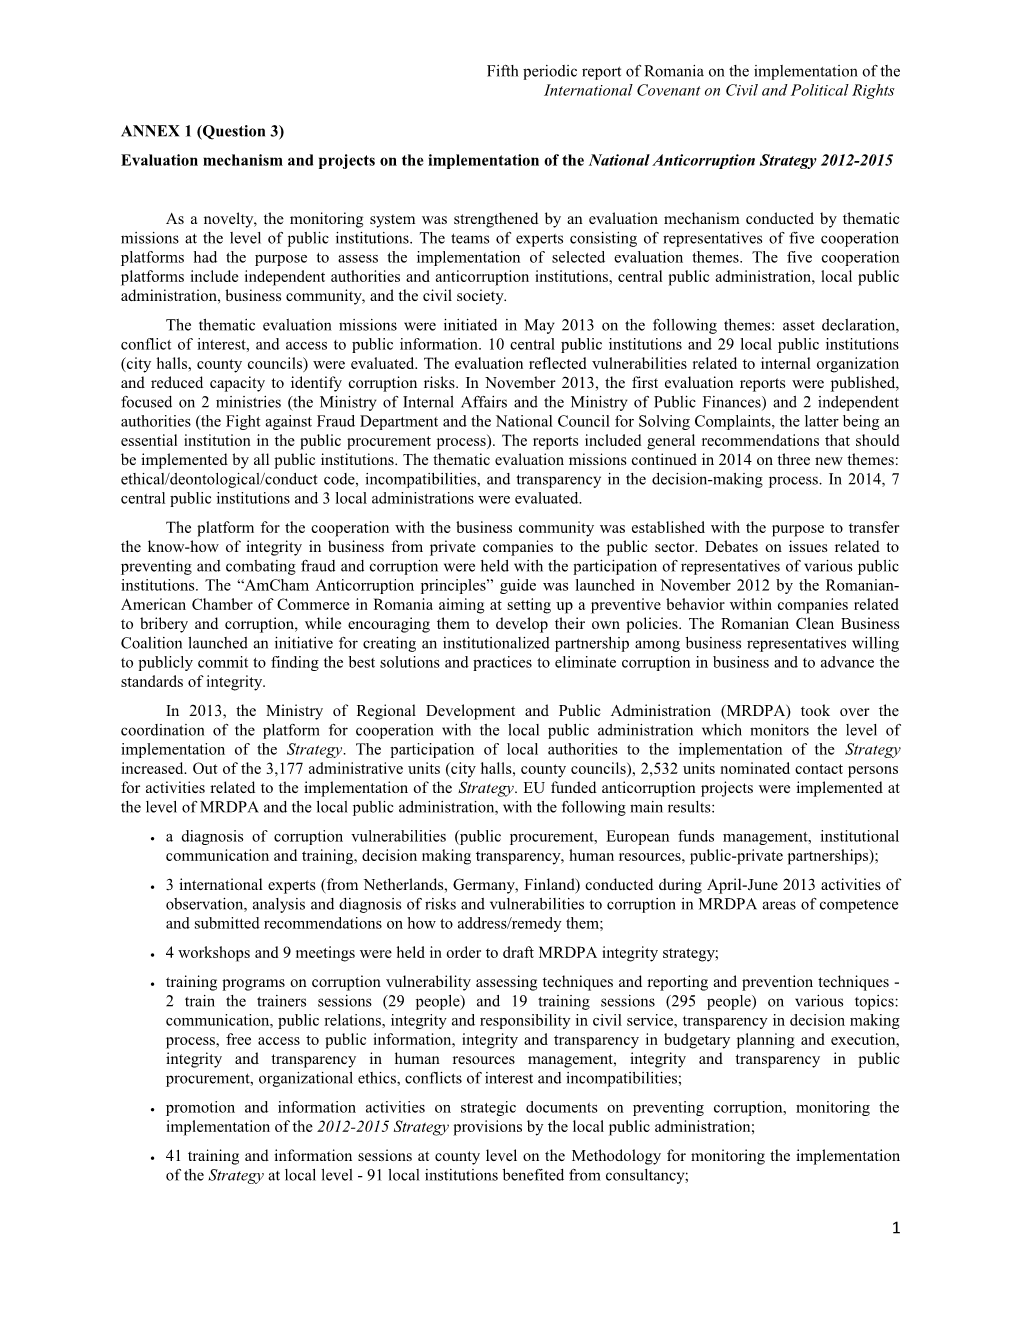 Fifth Periodic Report of Romania on the Implementation of The